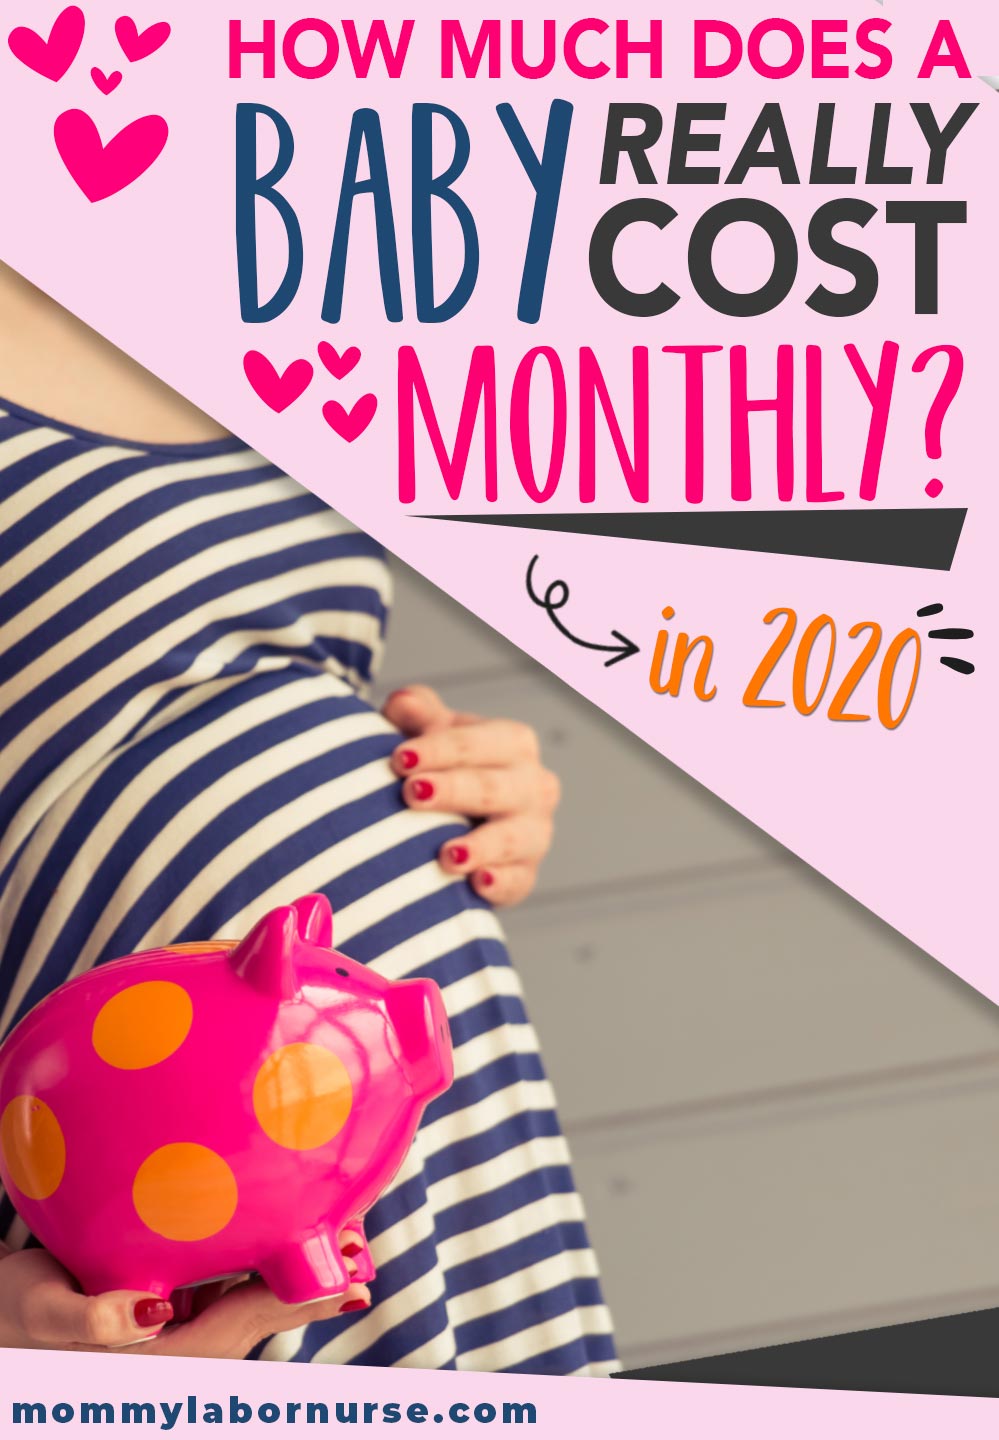 how much does baby cost per month on average